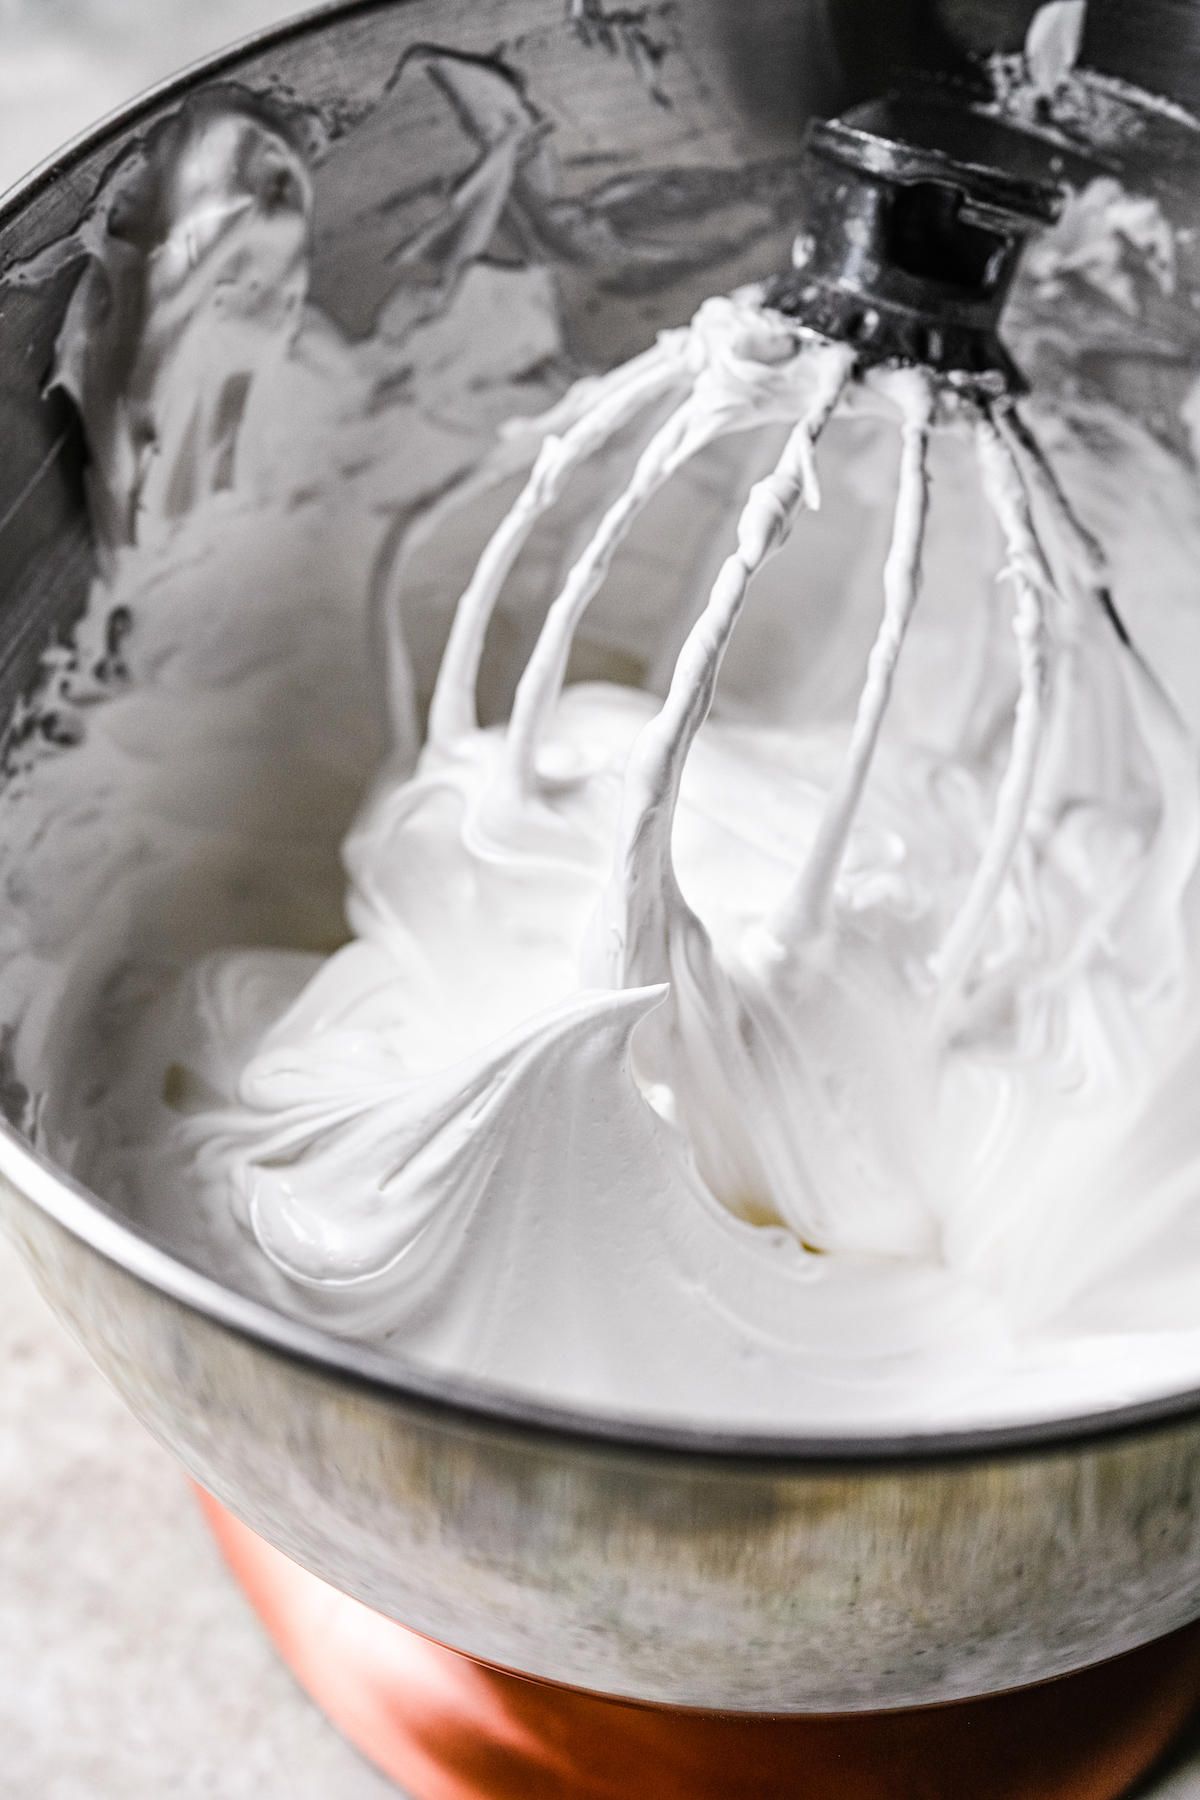 Egg whites, sugar, and cream of tartar whipped to stiff peaks in a stand mixer.